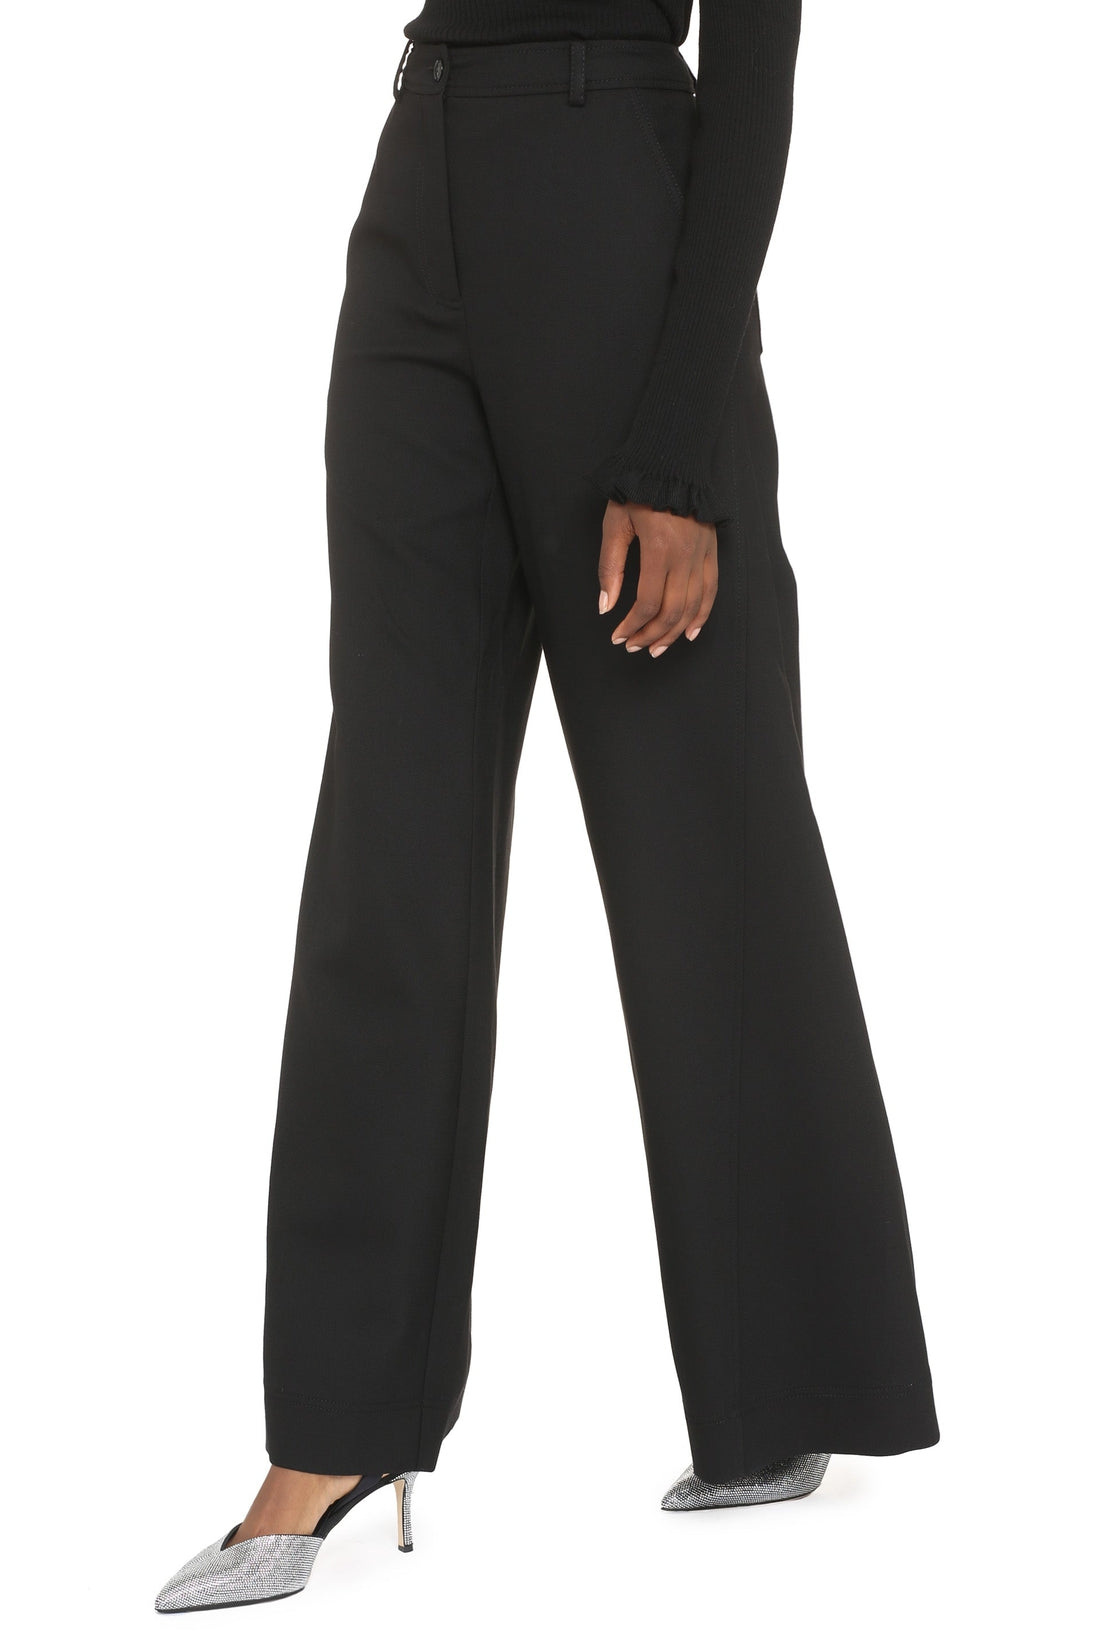 Boutique Moschino-OUTLET-SALE-High-waist wide-leg trousers-ARCHIVIST